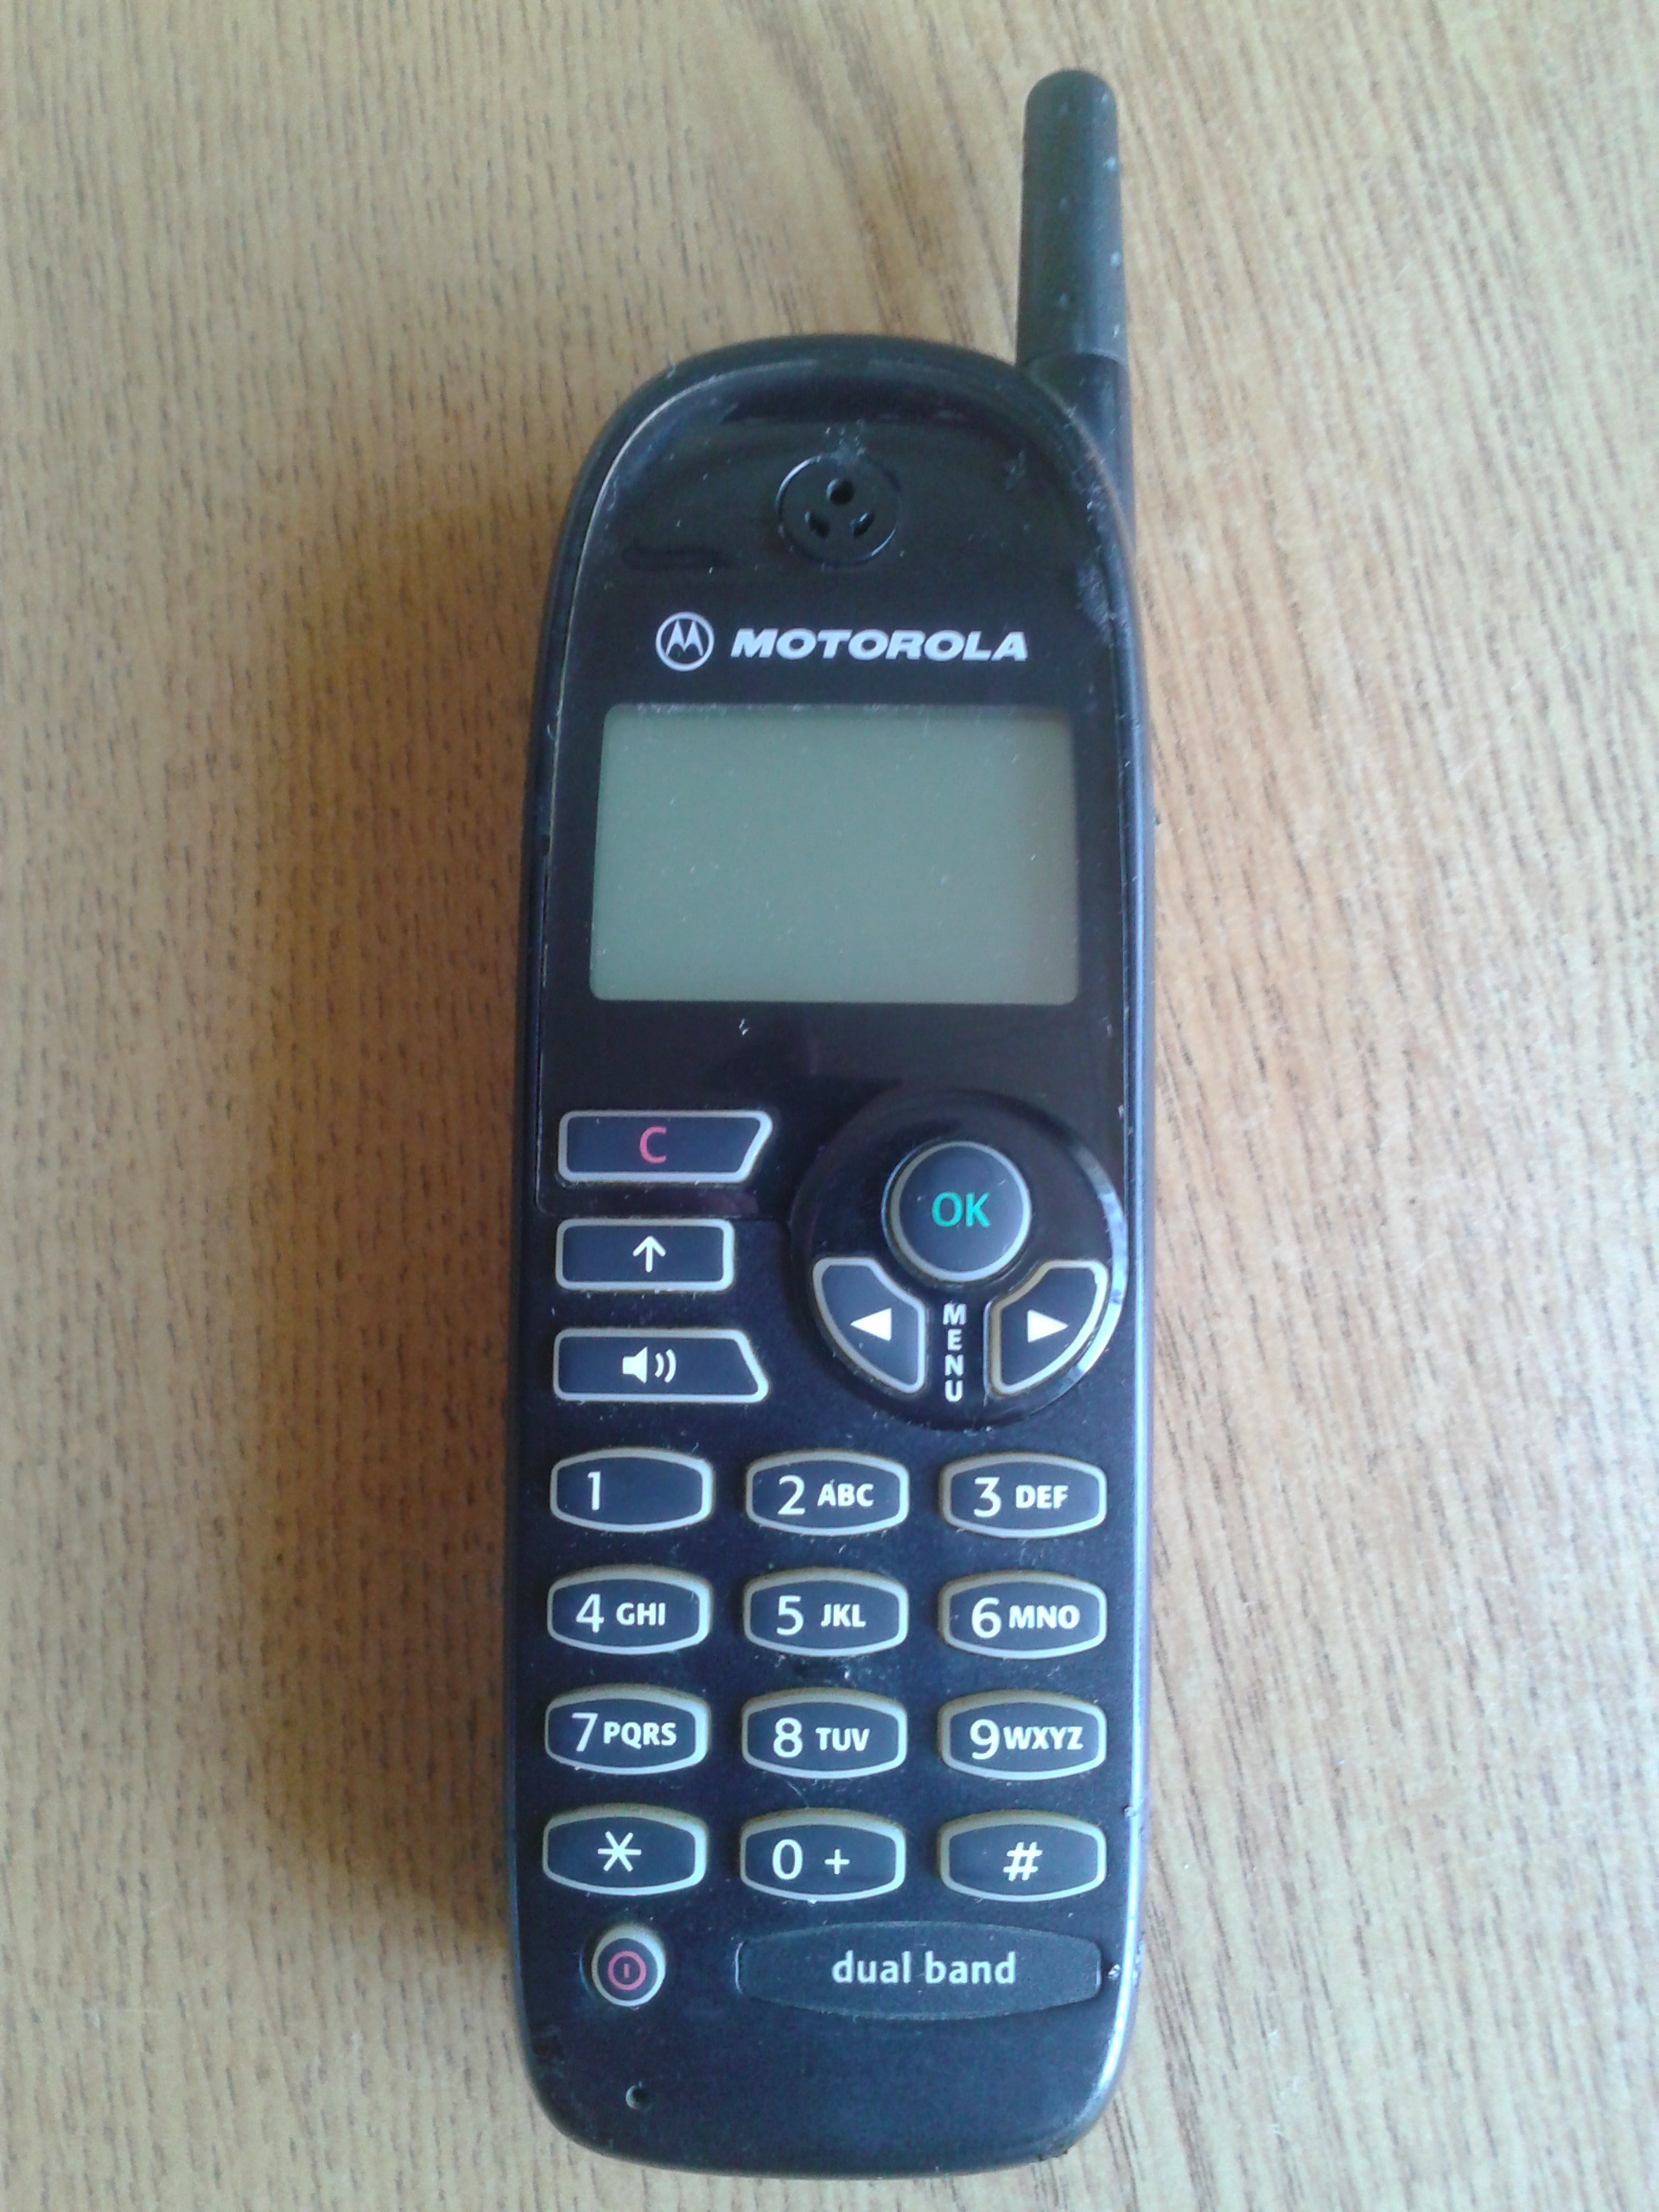 Reply to the post “Grandma brought her phone for repair” - My, Work, Rarity, Telephone, Nostalgia, Samsung, MTS, Old things, SIM card, Reply to post, Longpost